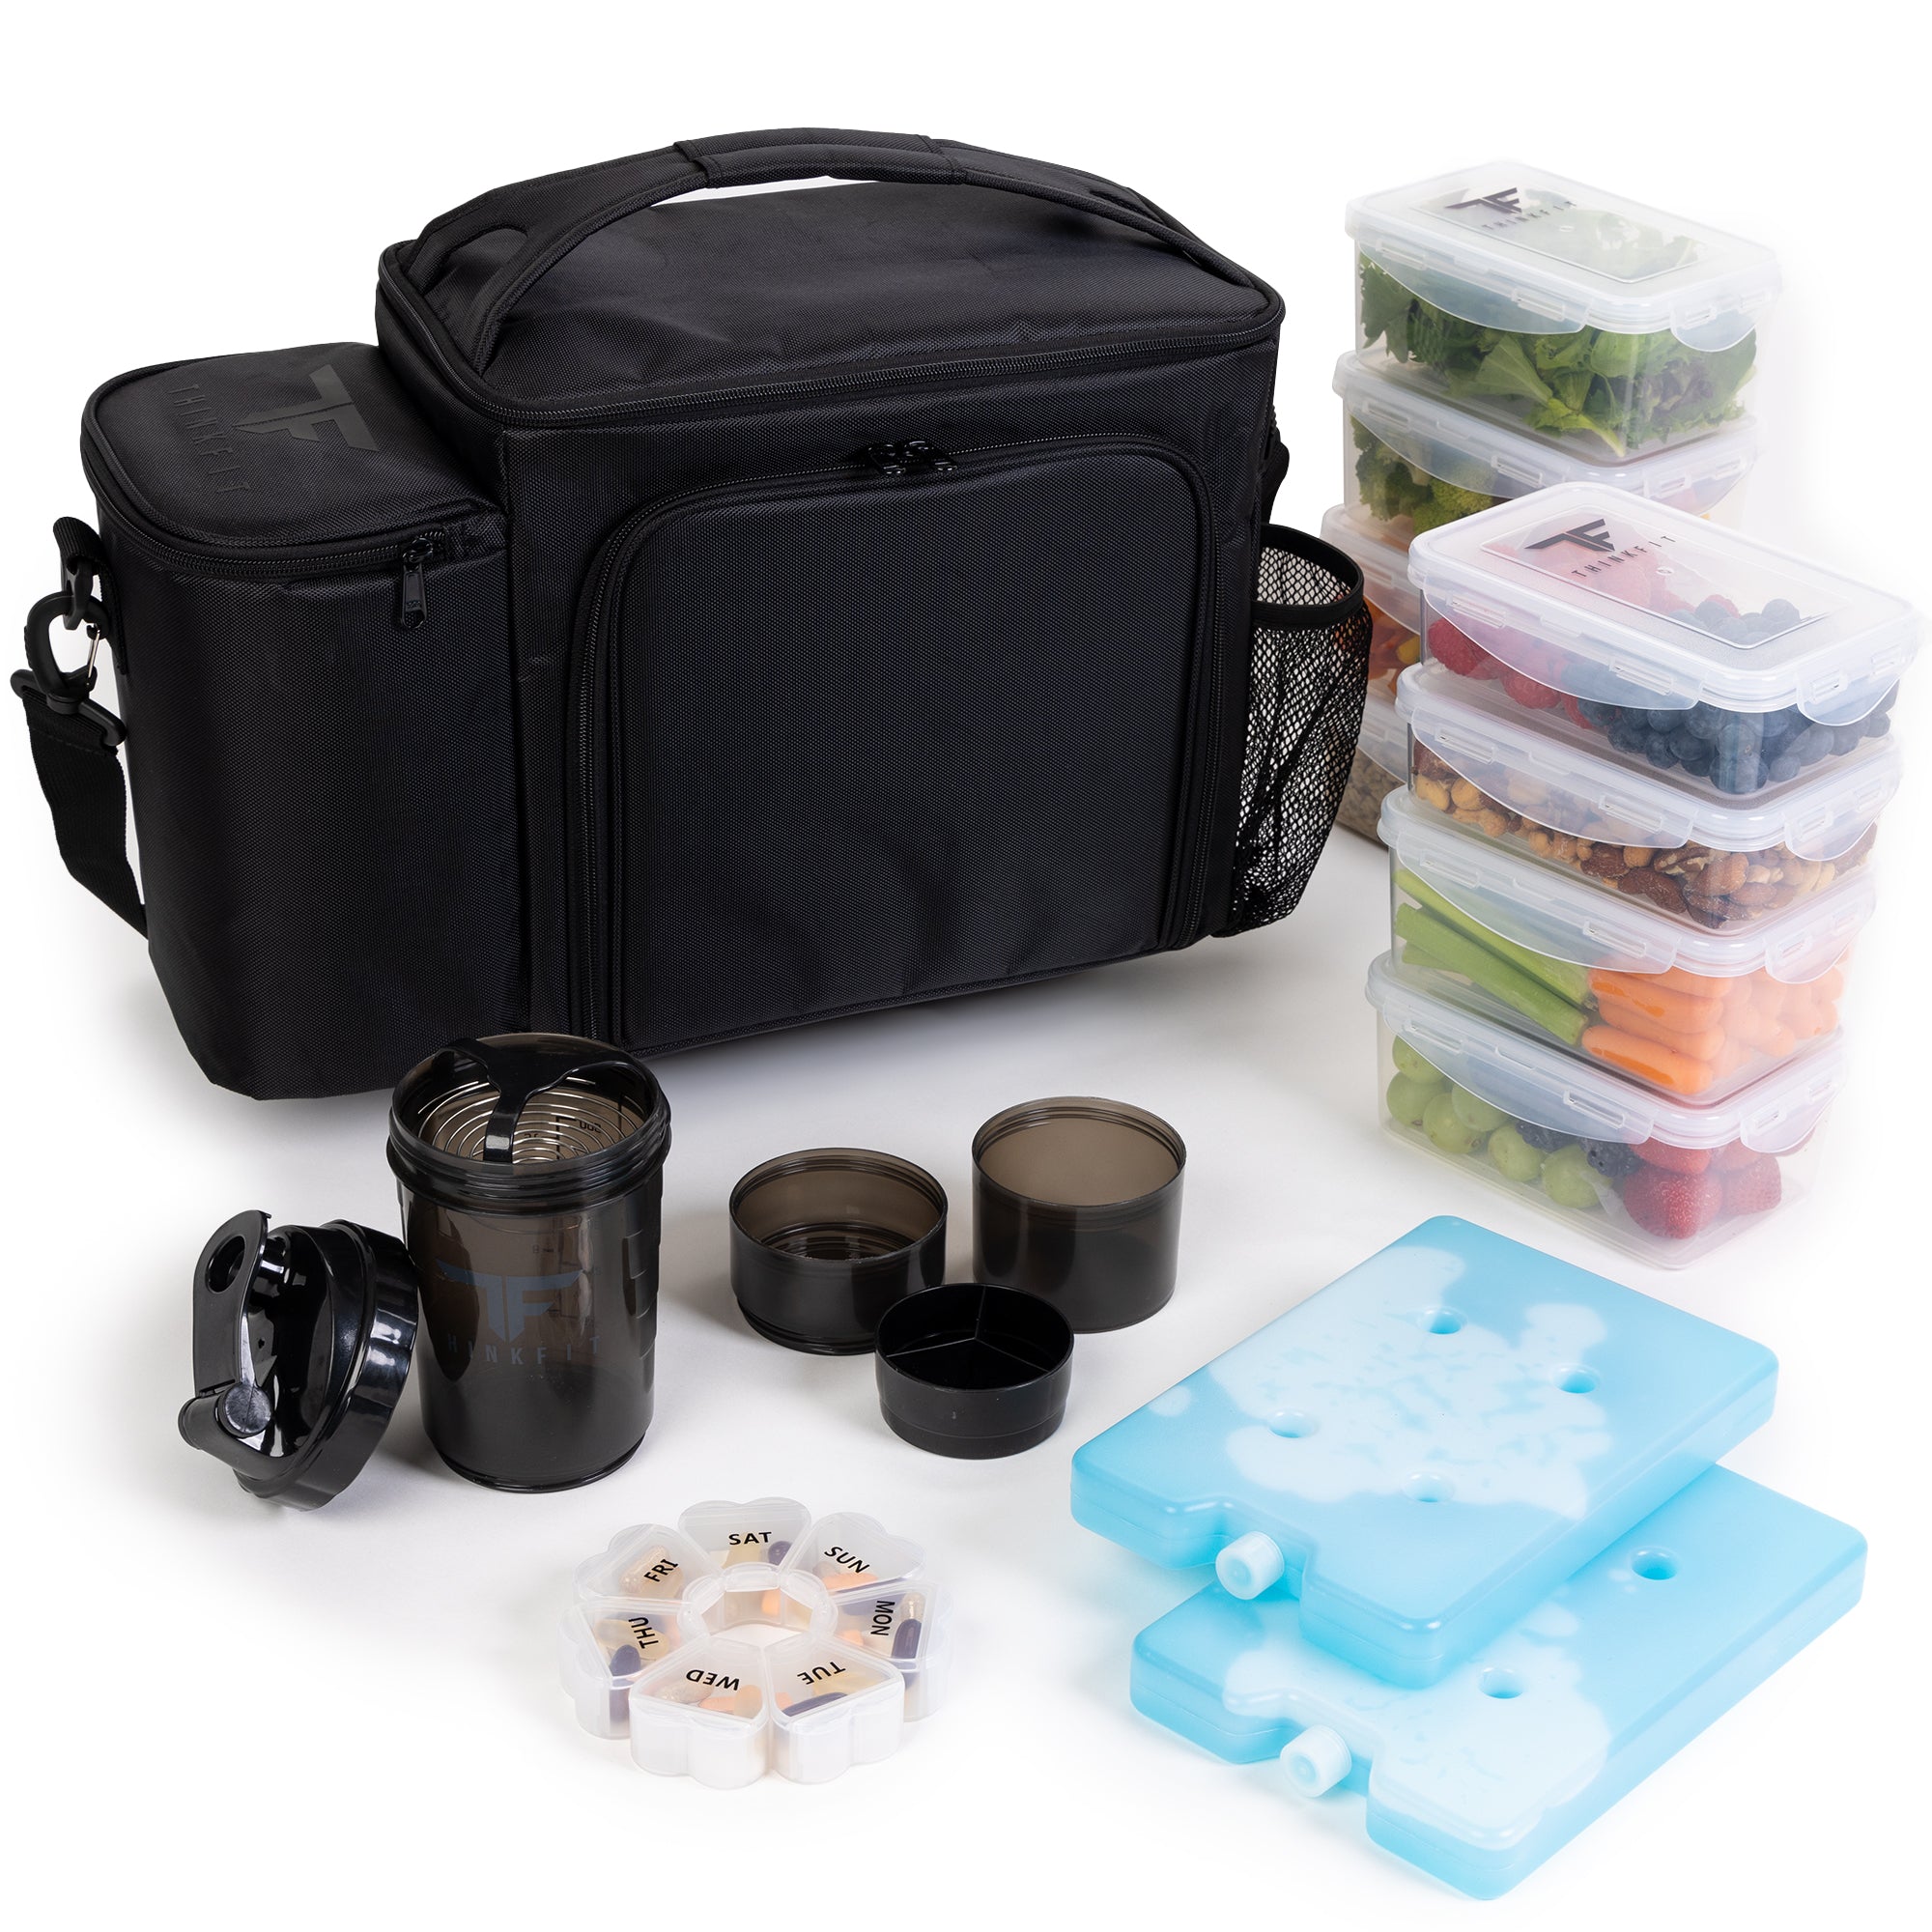 ThinkFit Clear Lunch Bag with 6 Meal Prep Containers - BPA-Free, Reusable, Microwave + Freezer Safe - with Shaker Cup and More! Clear Lunch Box 